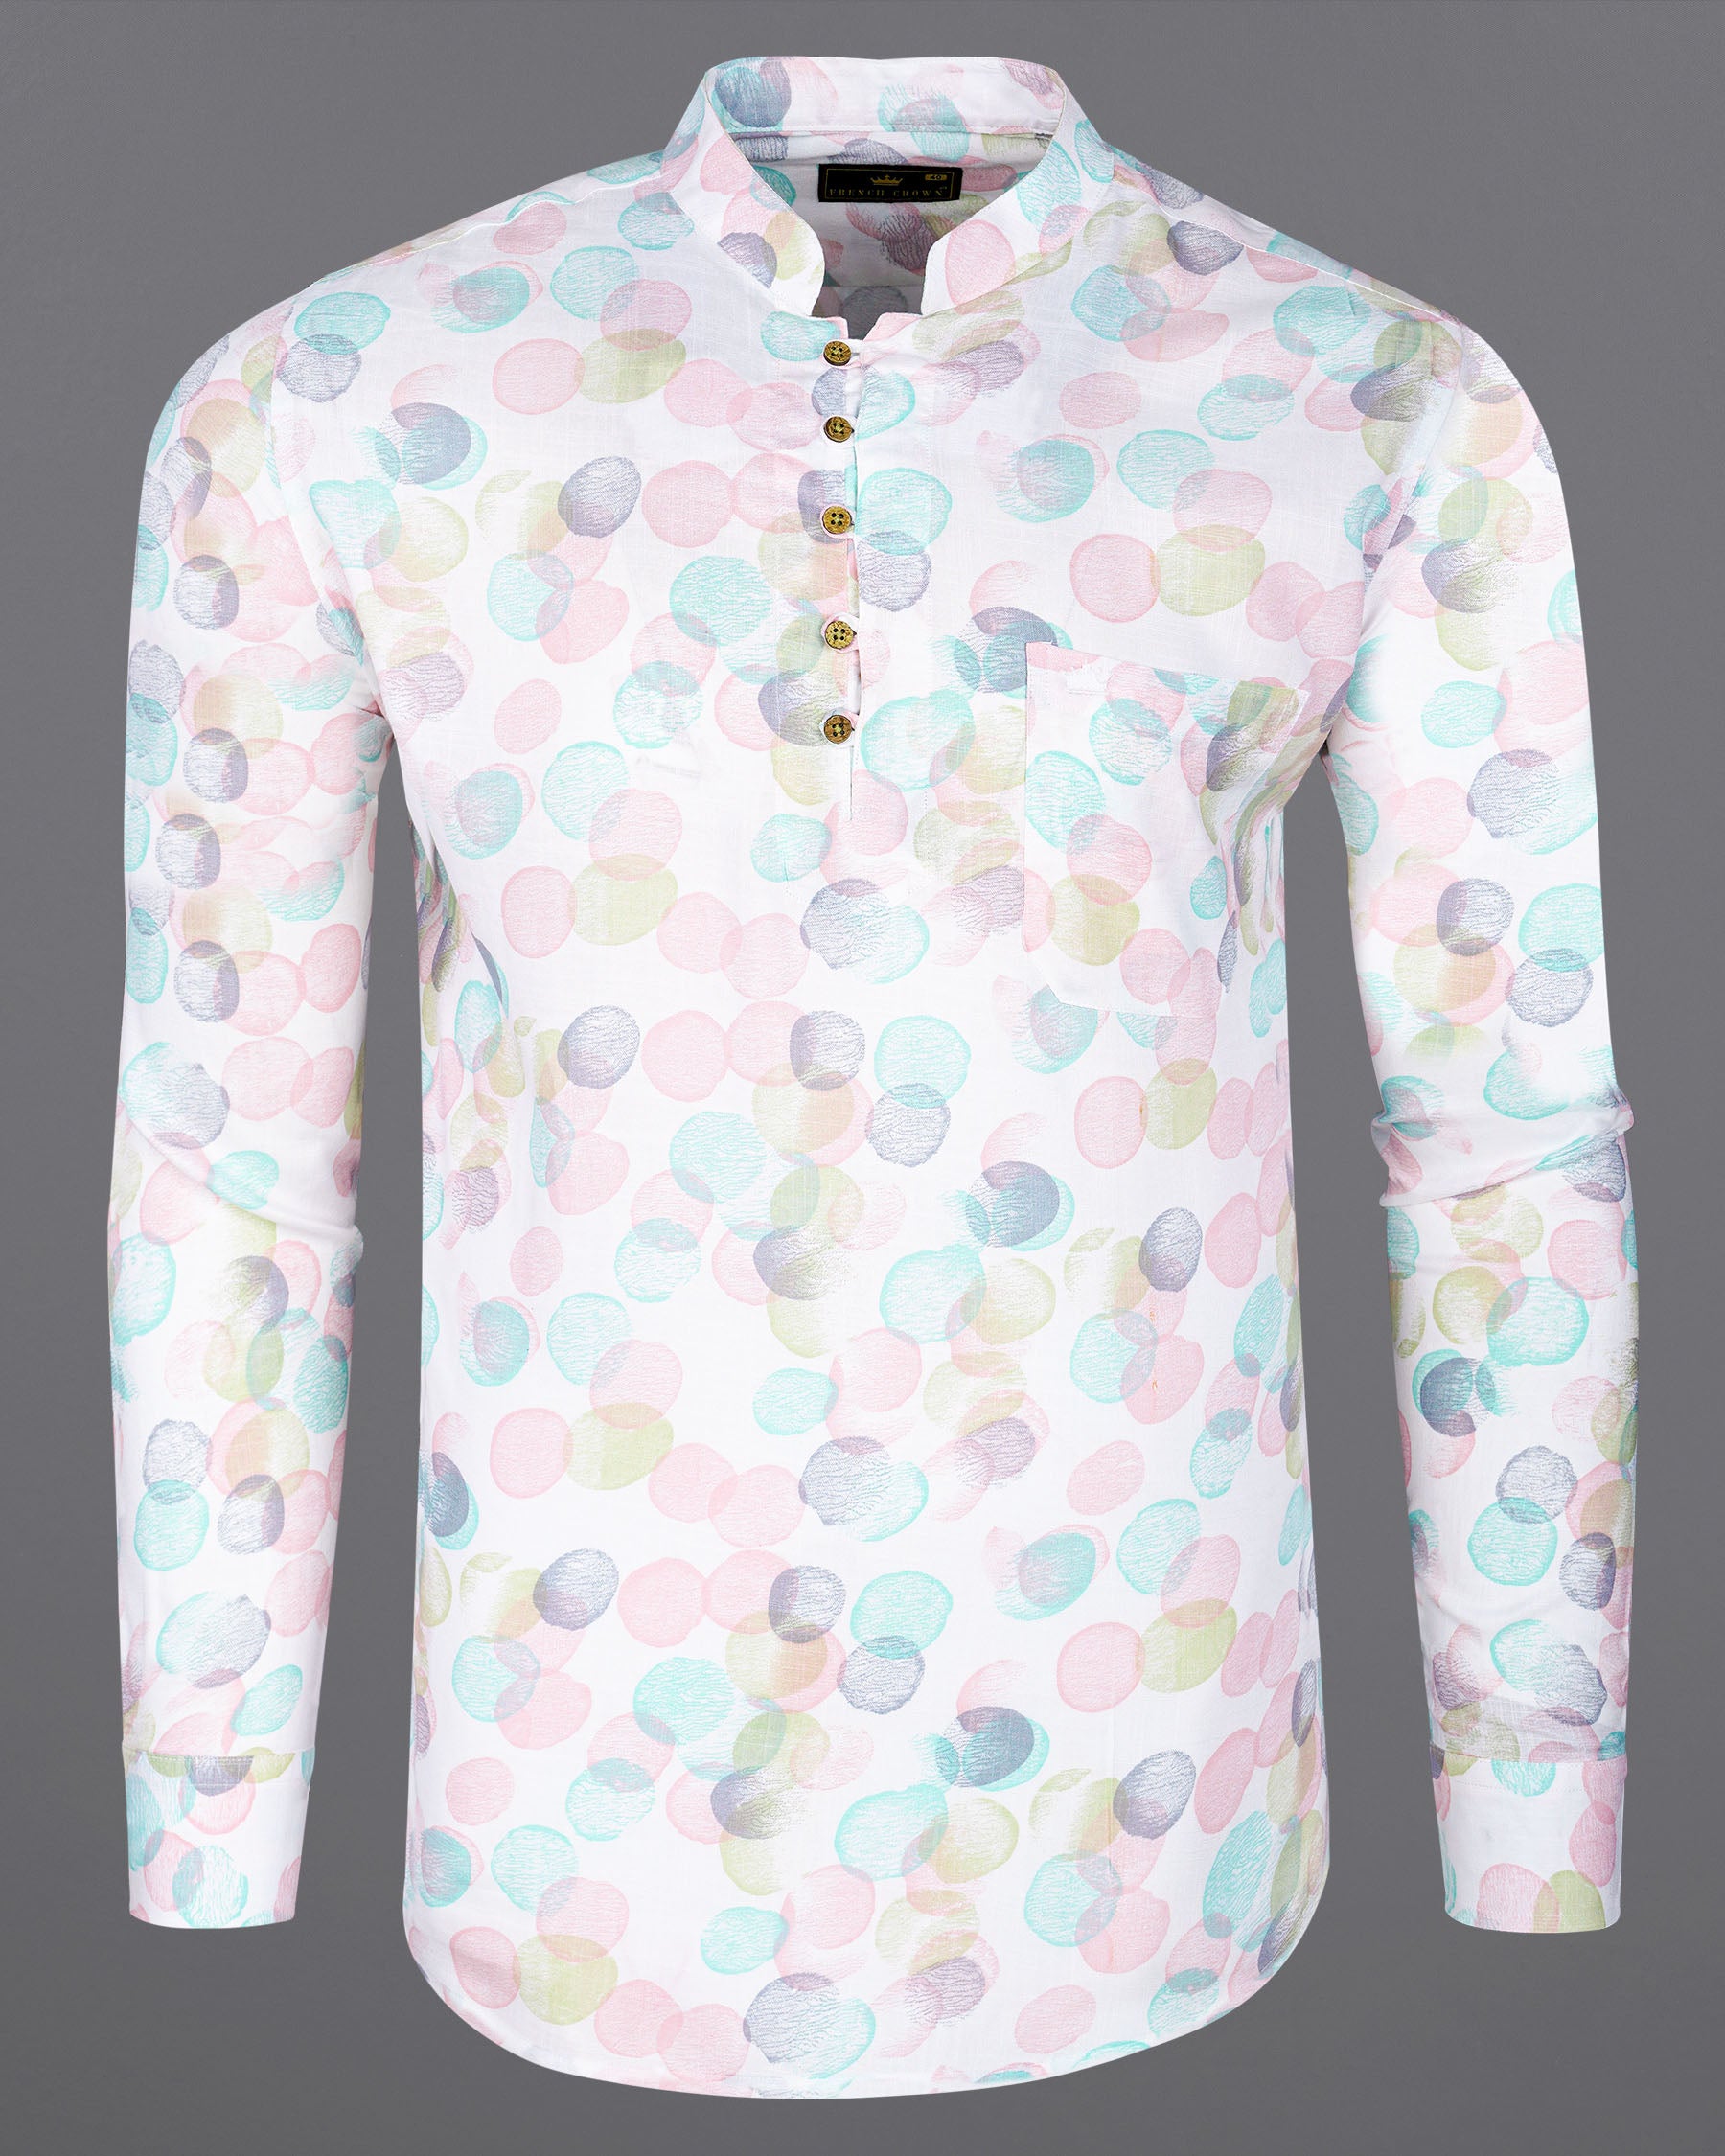 Iceberg Blue and Quill Pink Polka Dotted Premium Tencel Kurta Shirt  7923-KS -38,7923-KS -H-38,7923-KS -39,7923-KS -H-39,7923-KS -40,7923-KS -H-40,7923-KS -42,7923-KS -H-42,7923-KS -44,7923-KS -H-44,7923-KS -46,7923-KS -H-46,7923-KS -48,7923-KS -H-48,7923-KS -50,7923-KS -H-50,7923-KS -52,7923-KS -H-52